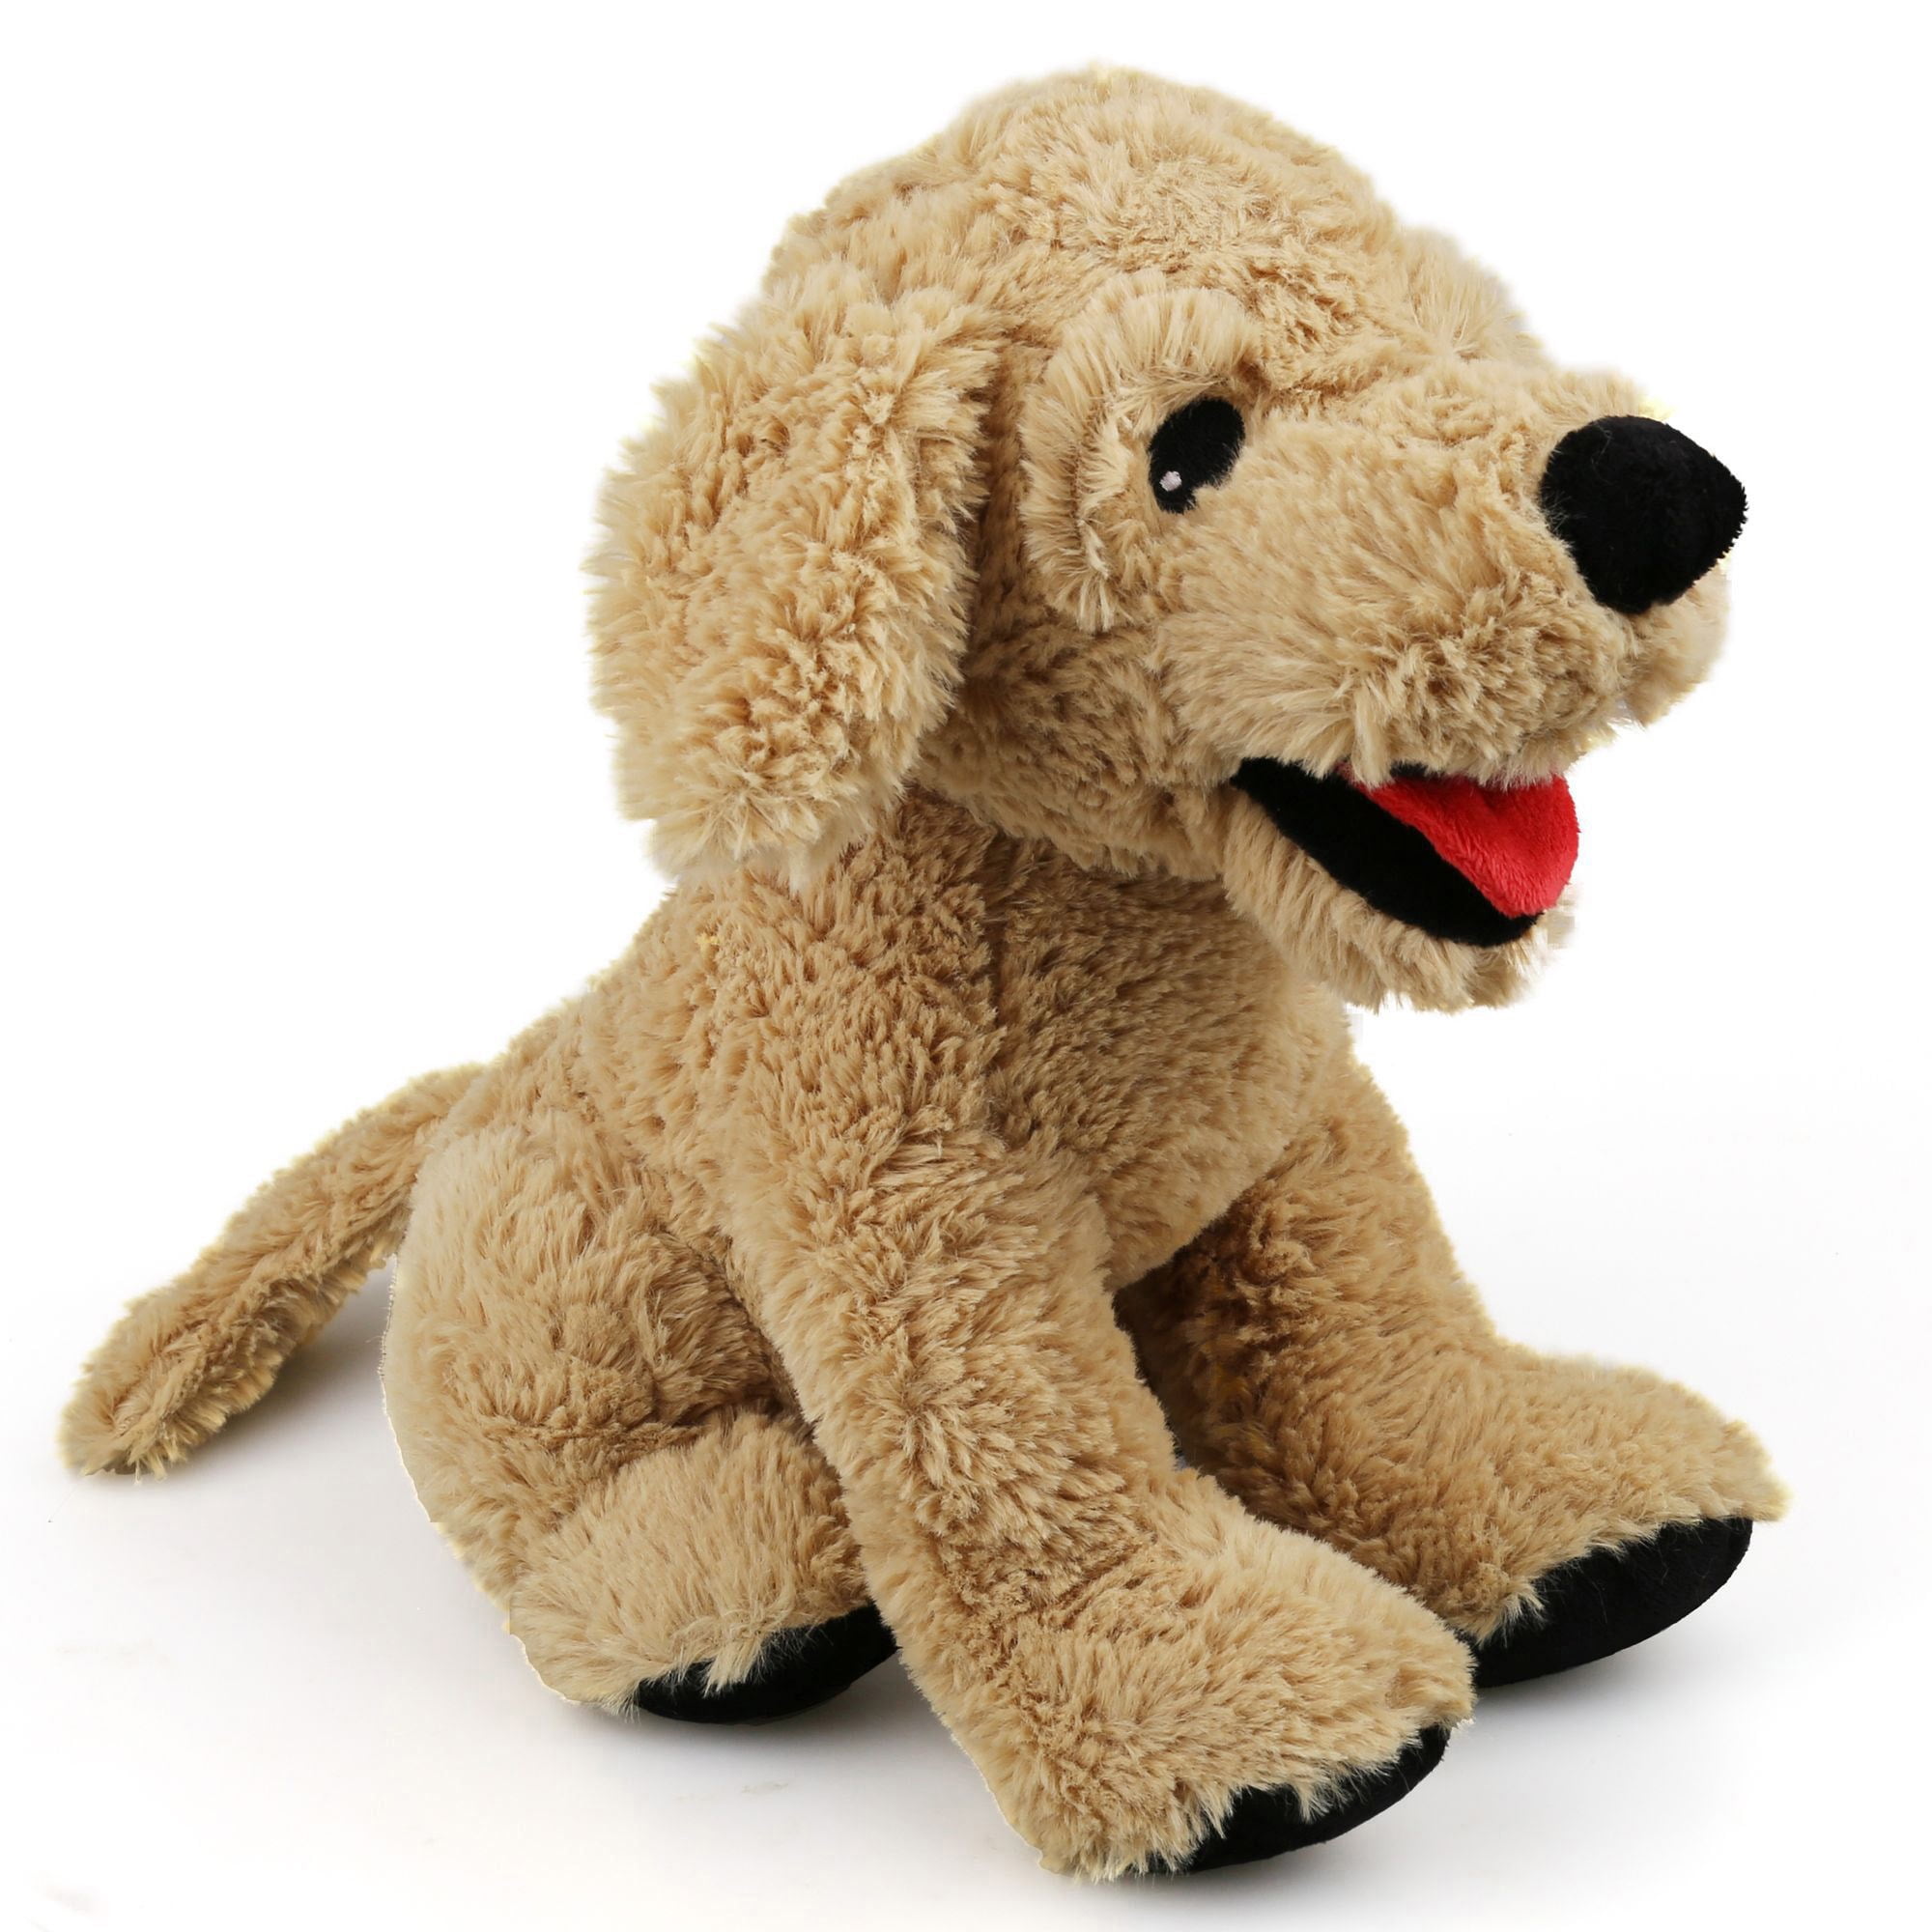 soft toys for puppies